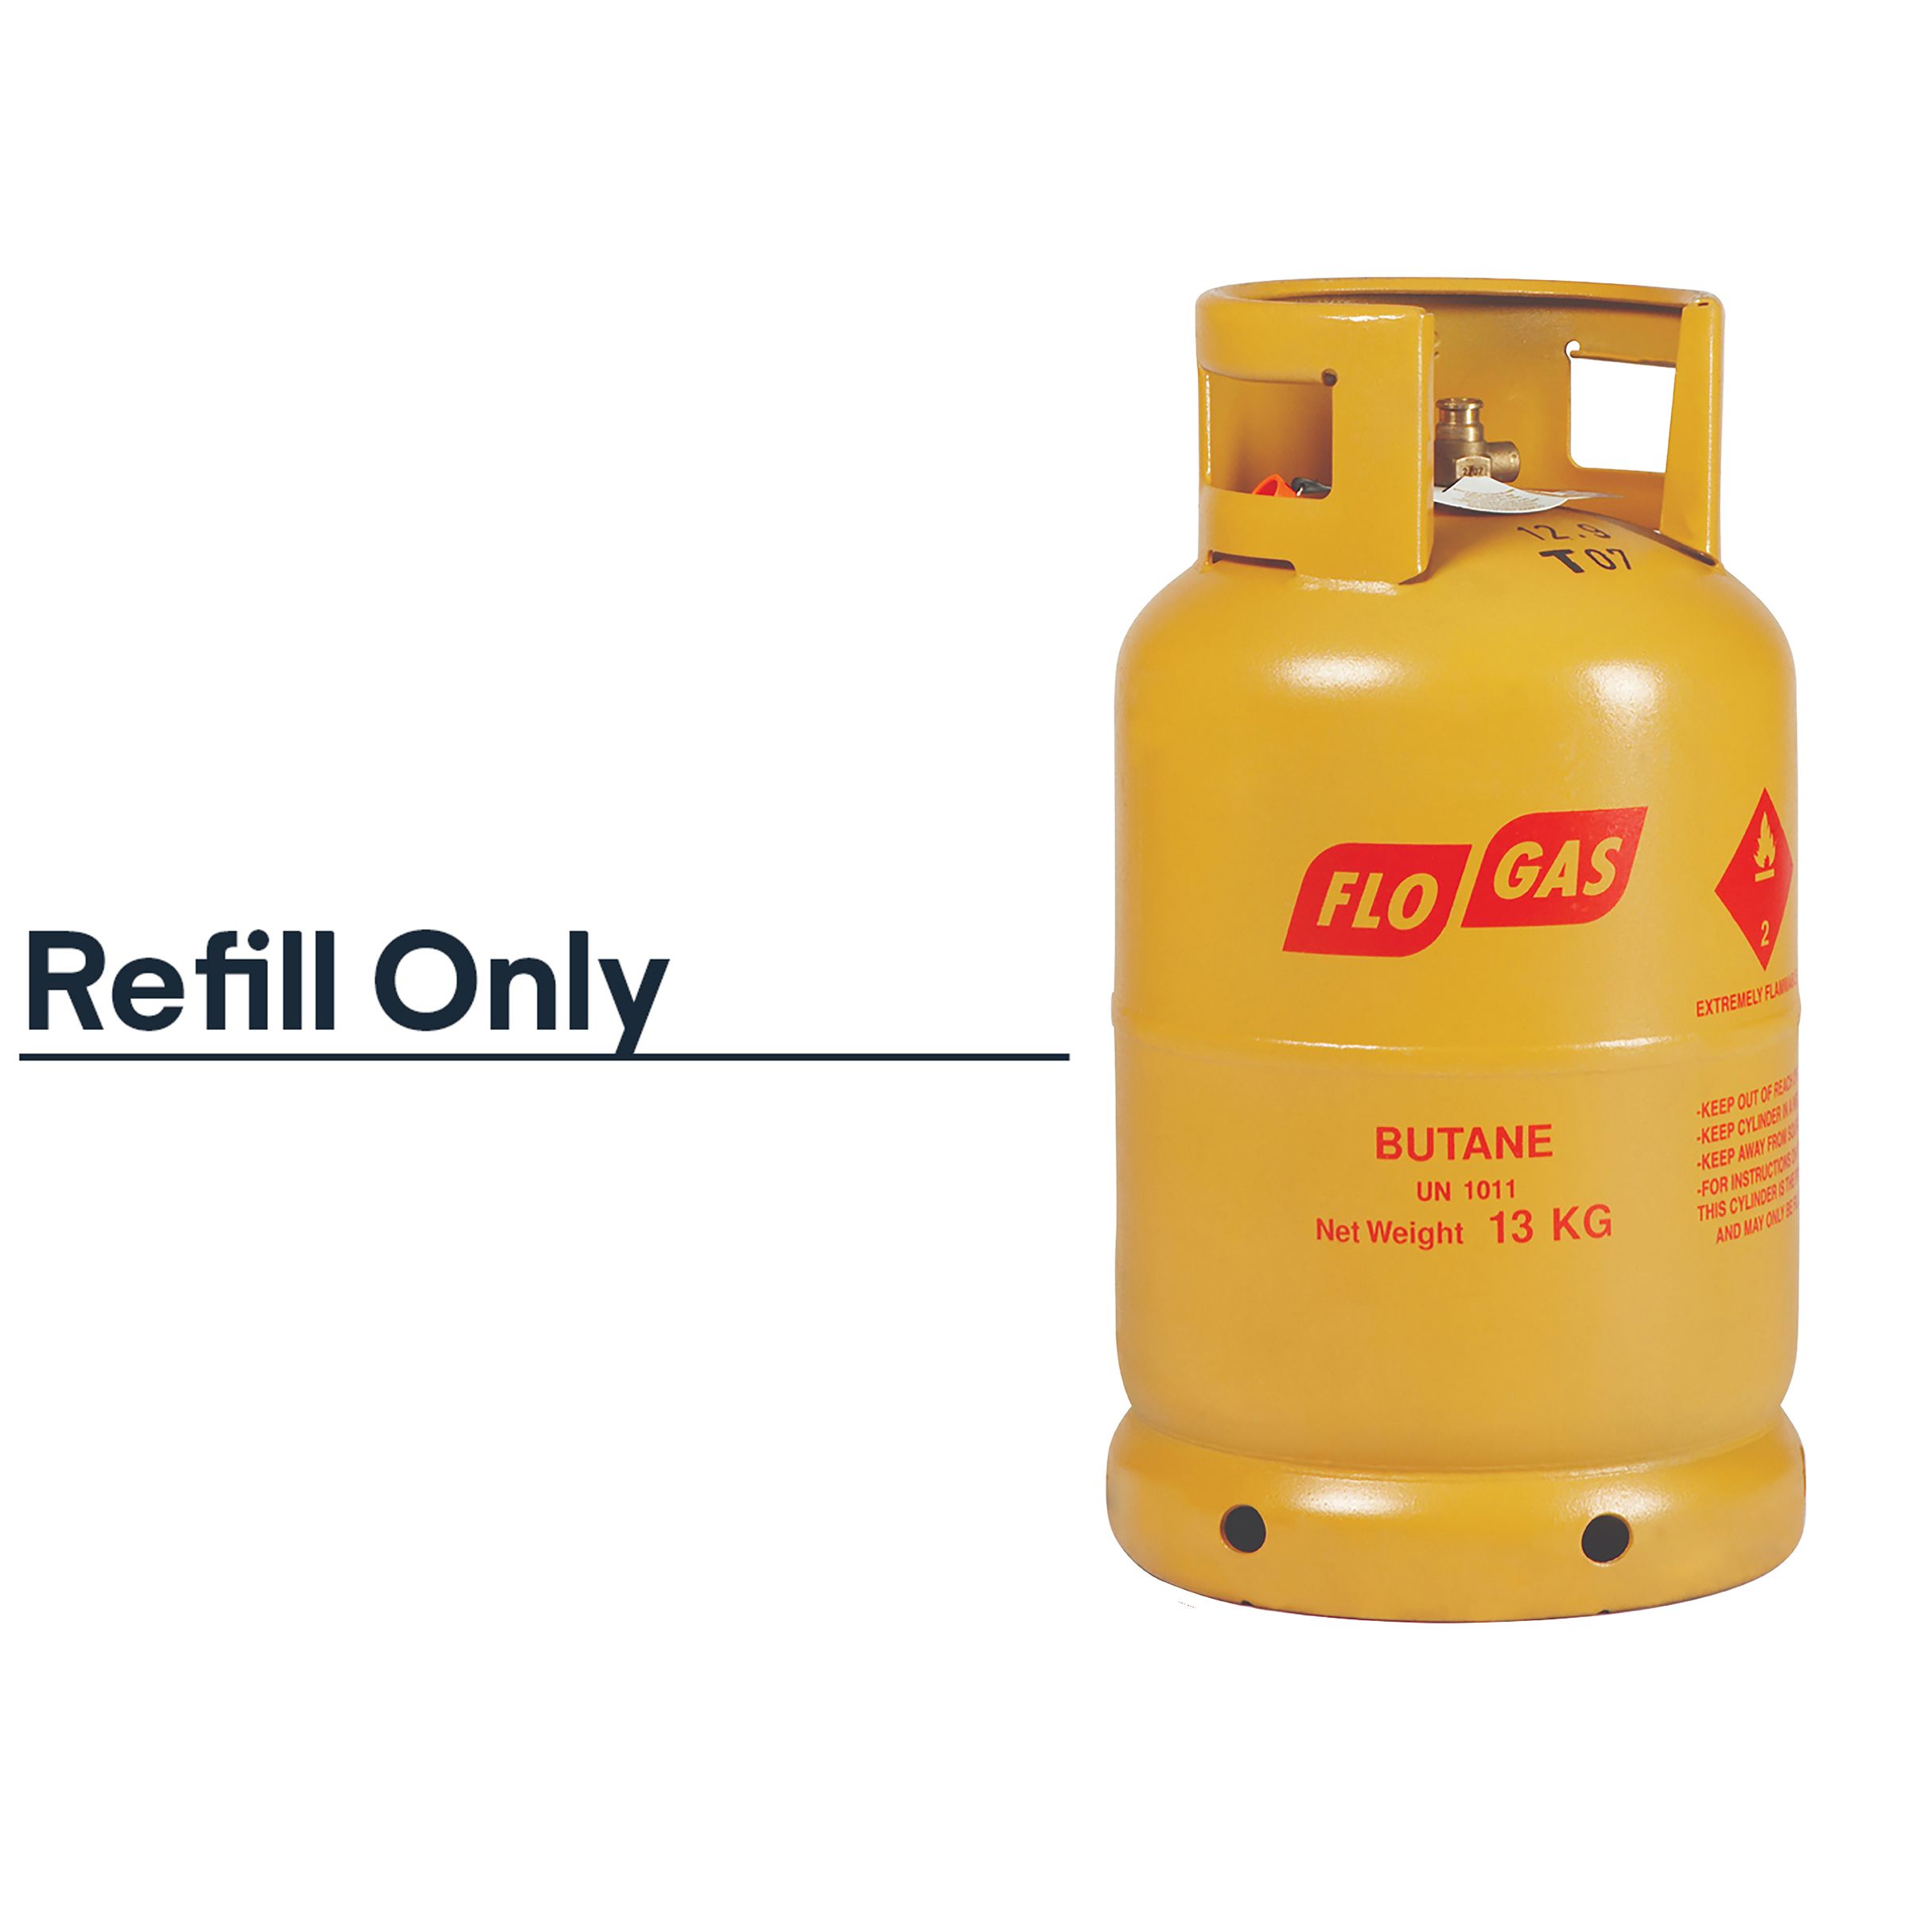 Flogas Butane Gas cylinder refill, 13kg - Existing contract required